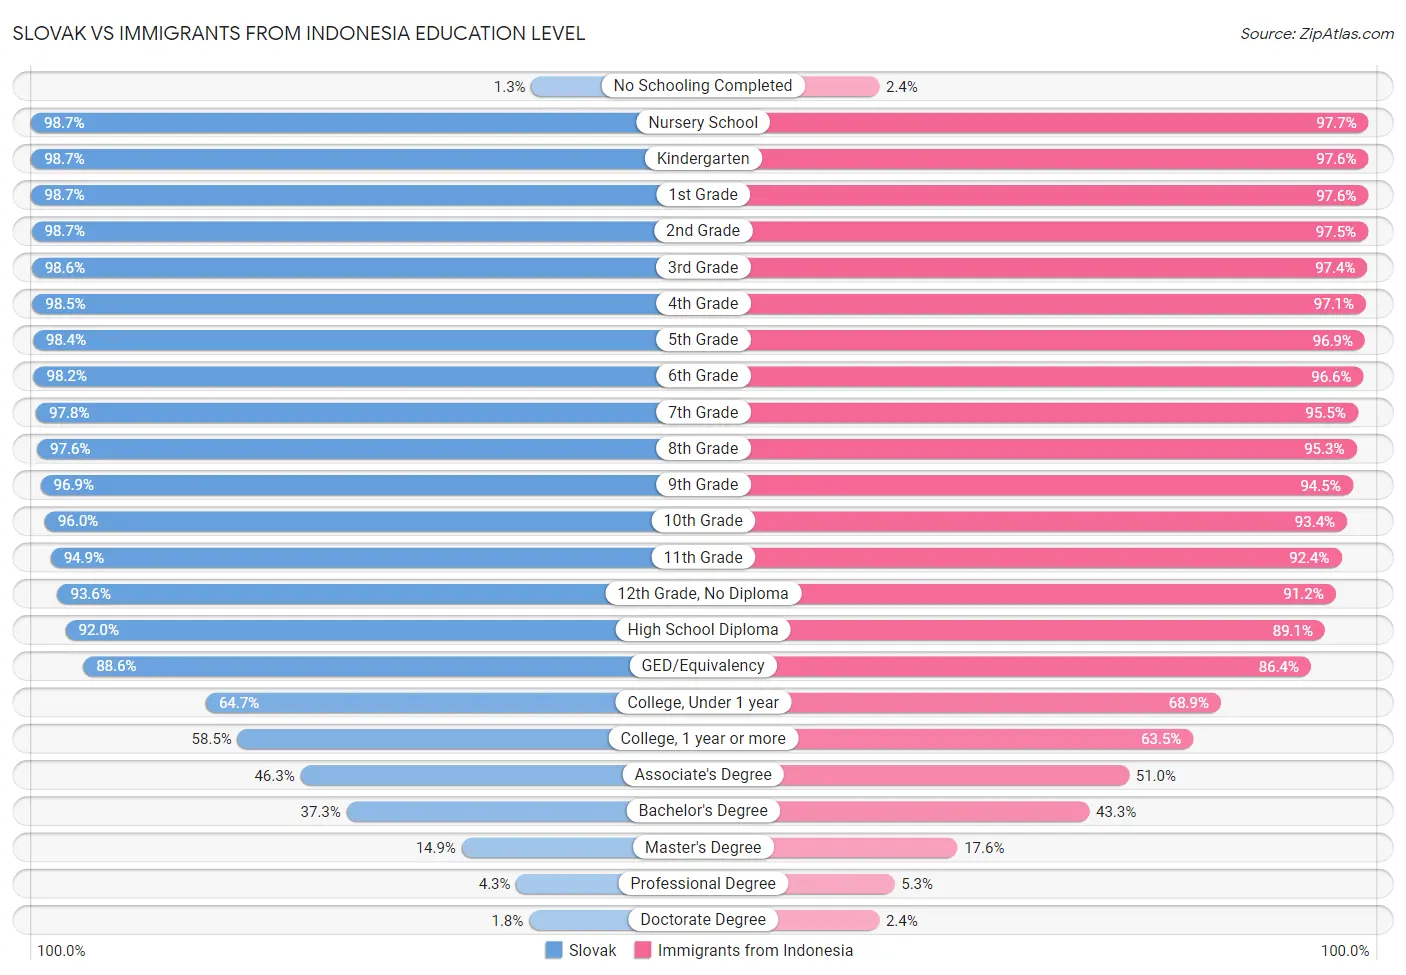 Slovak vs Immigrants from Indonesia Education Level